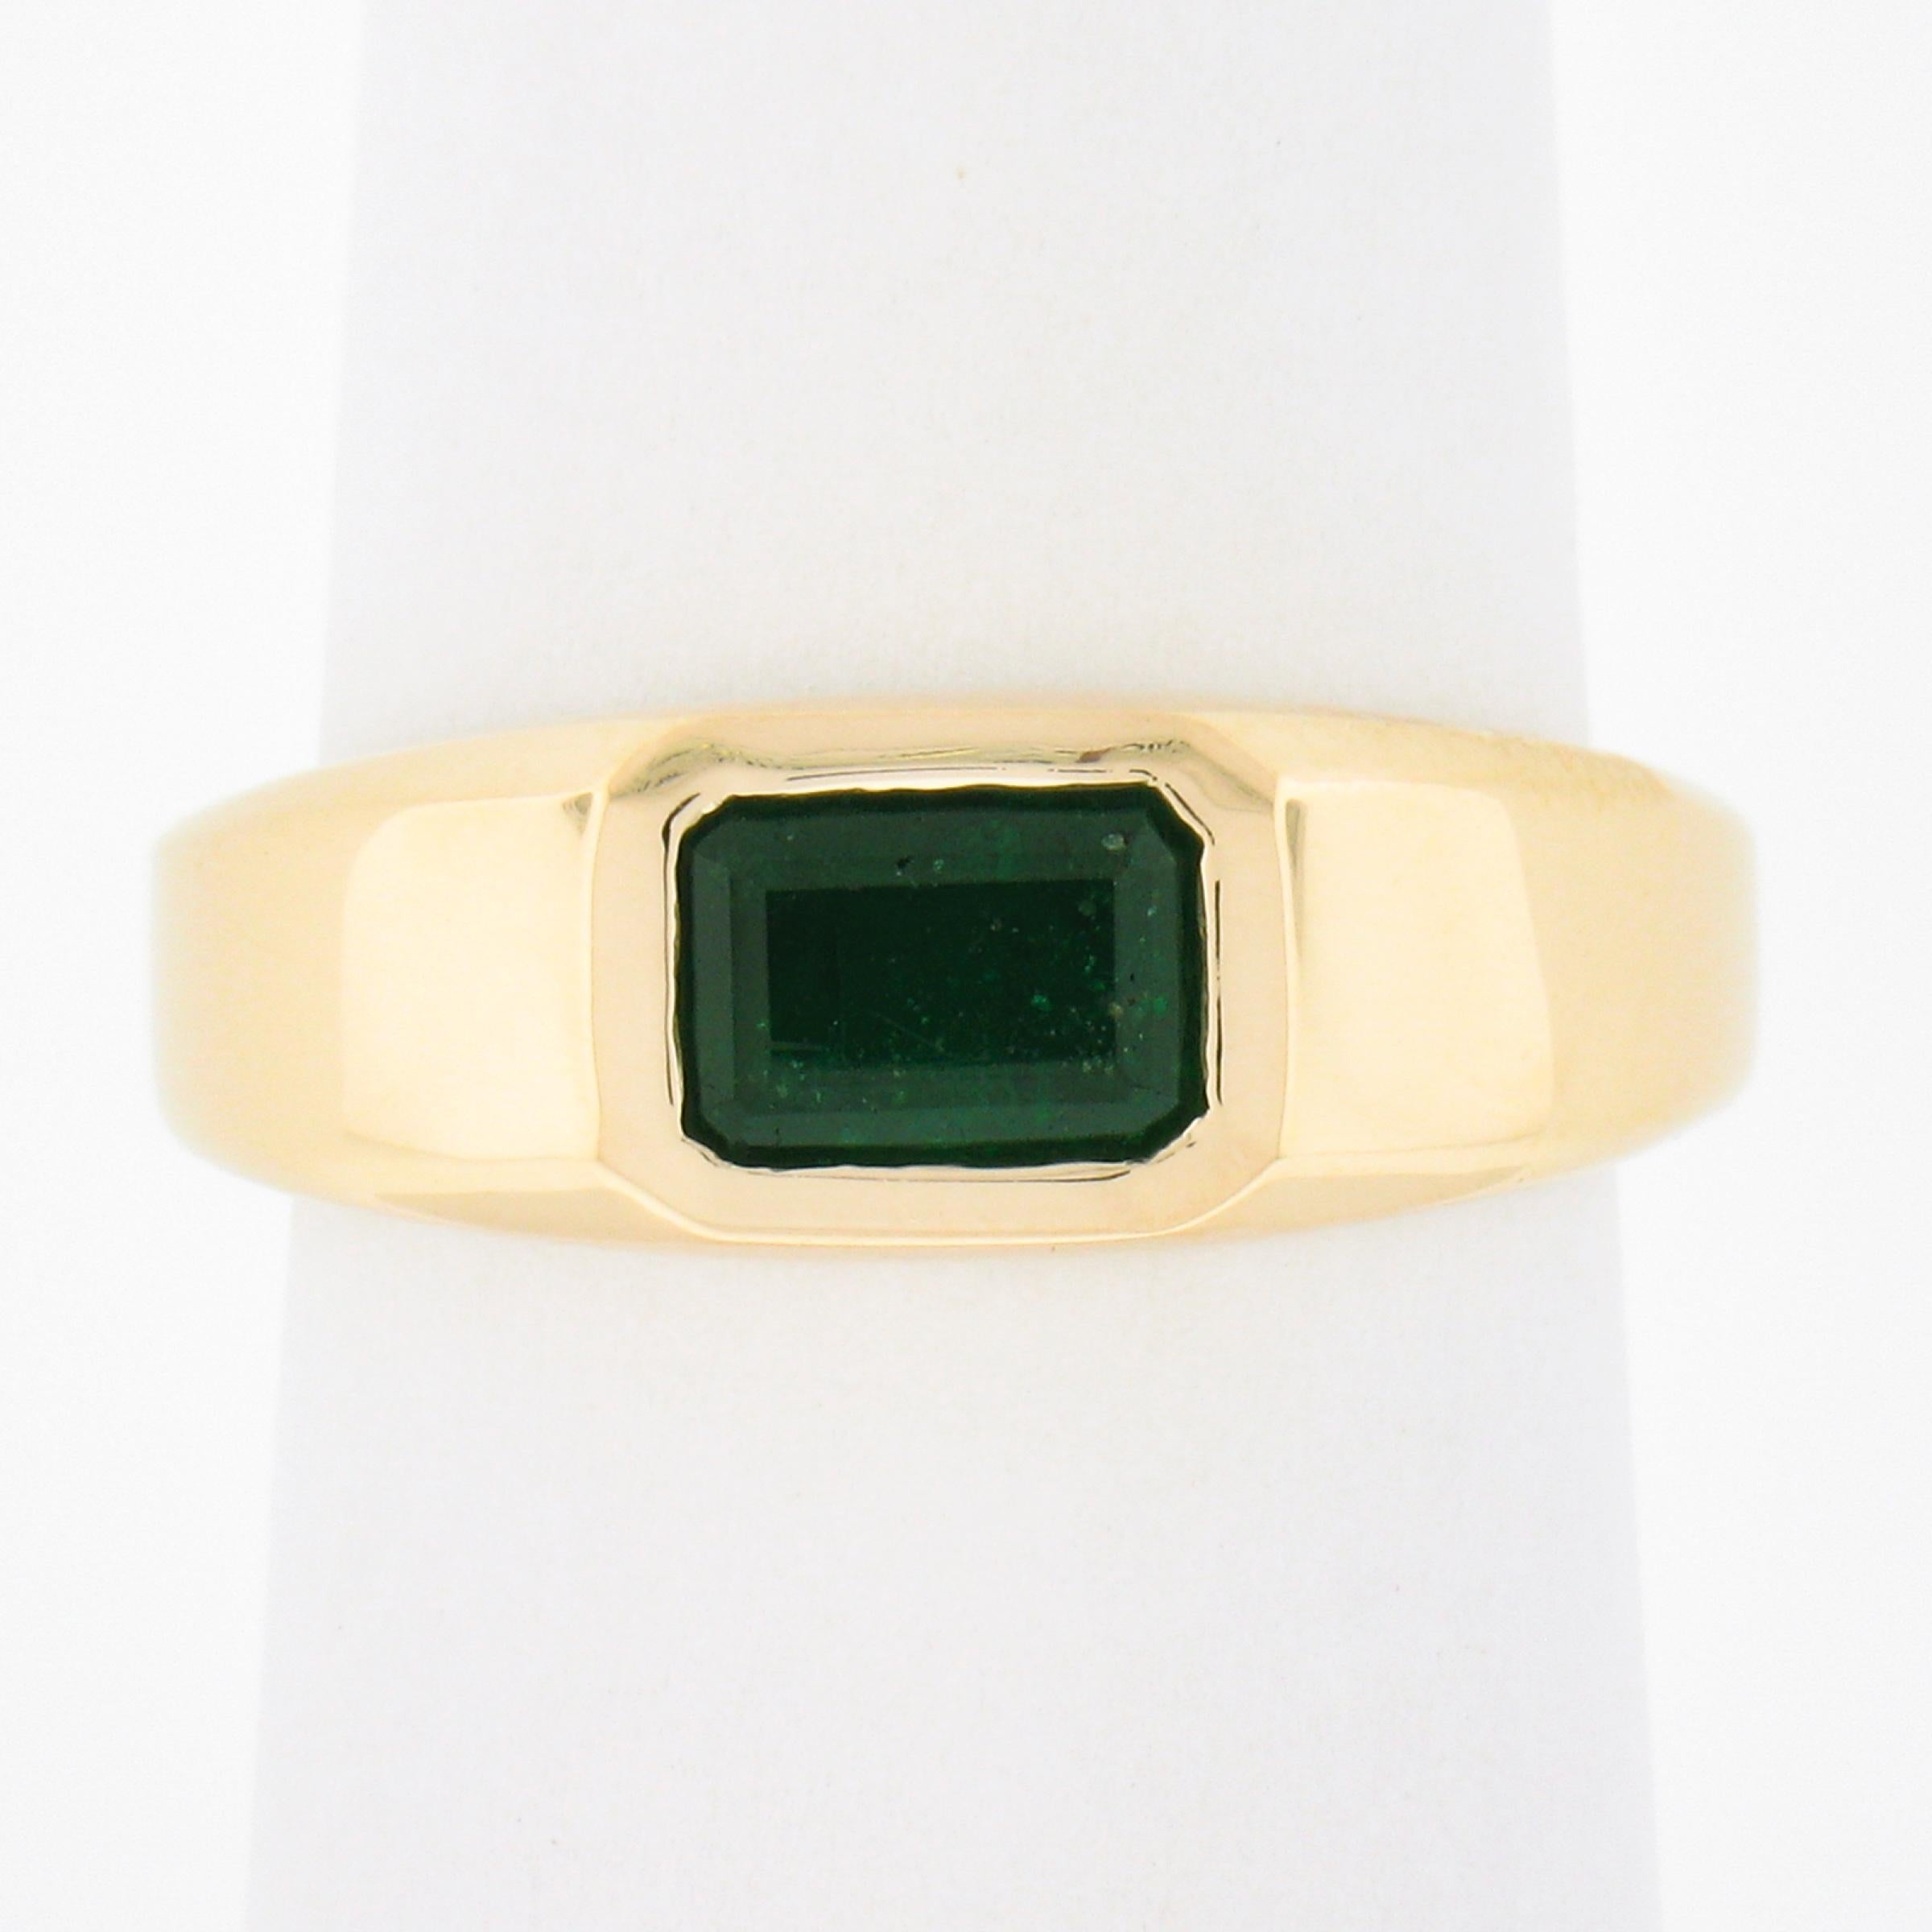 Here we have a simple, yet absolutely gorgeous, emerald solitaire ring that is newly crafted from solid 14k yellow gold. The solitaire is a nice deep green, elongated emerald cut natural genuine emerald stone and is neatly bezel set sideways at the